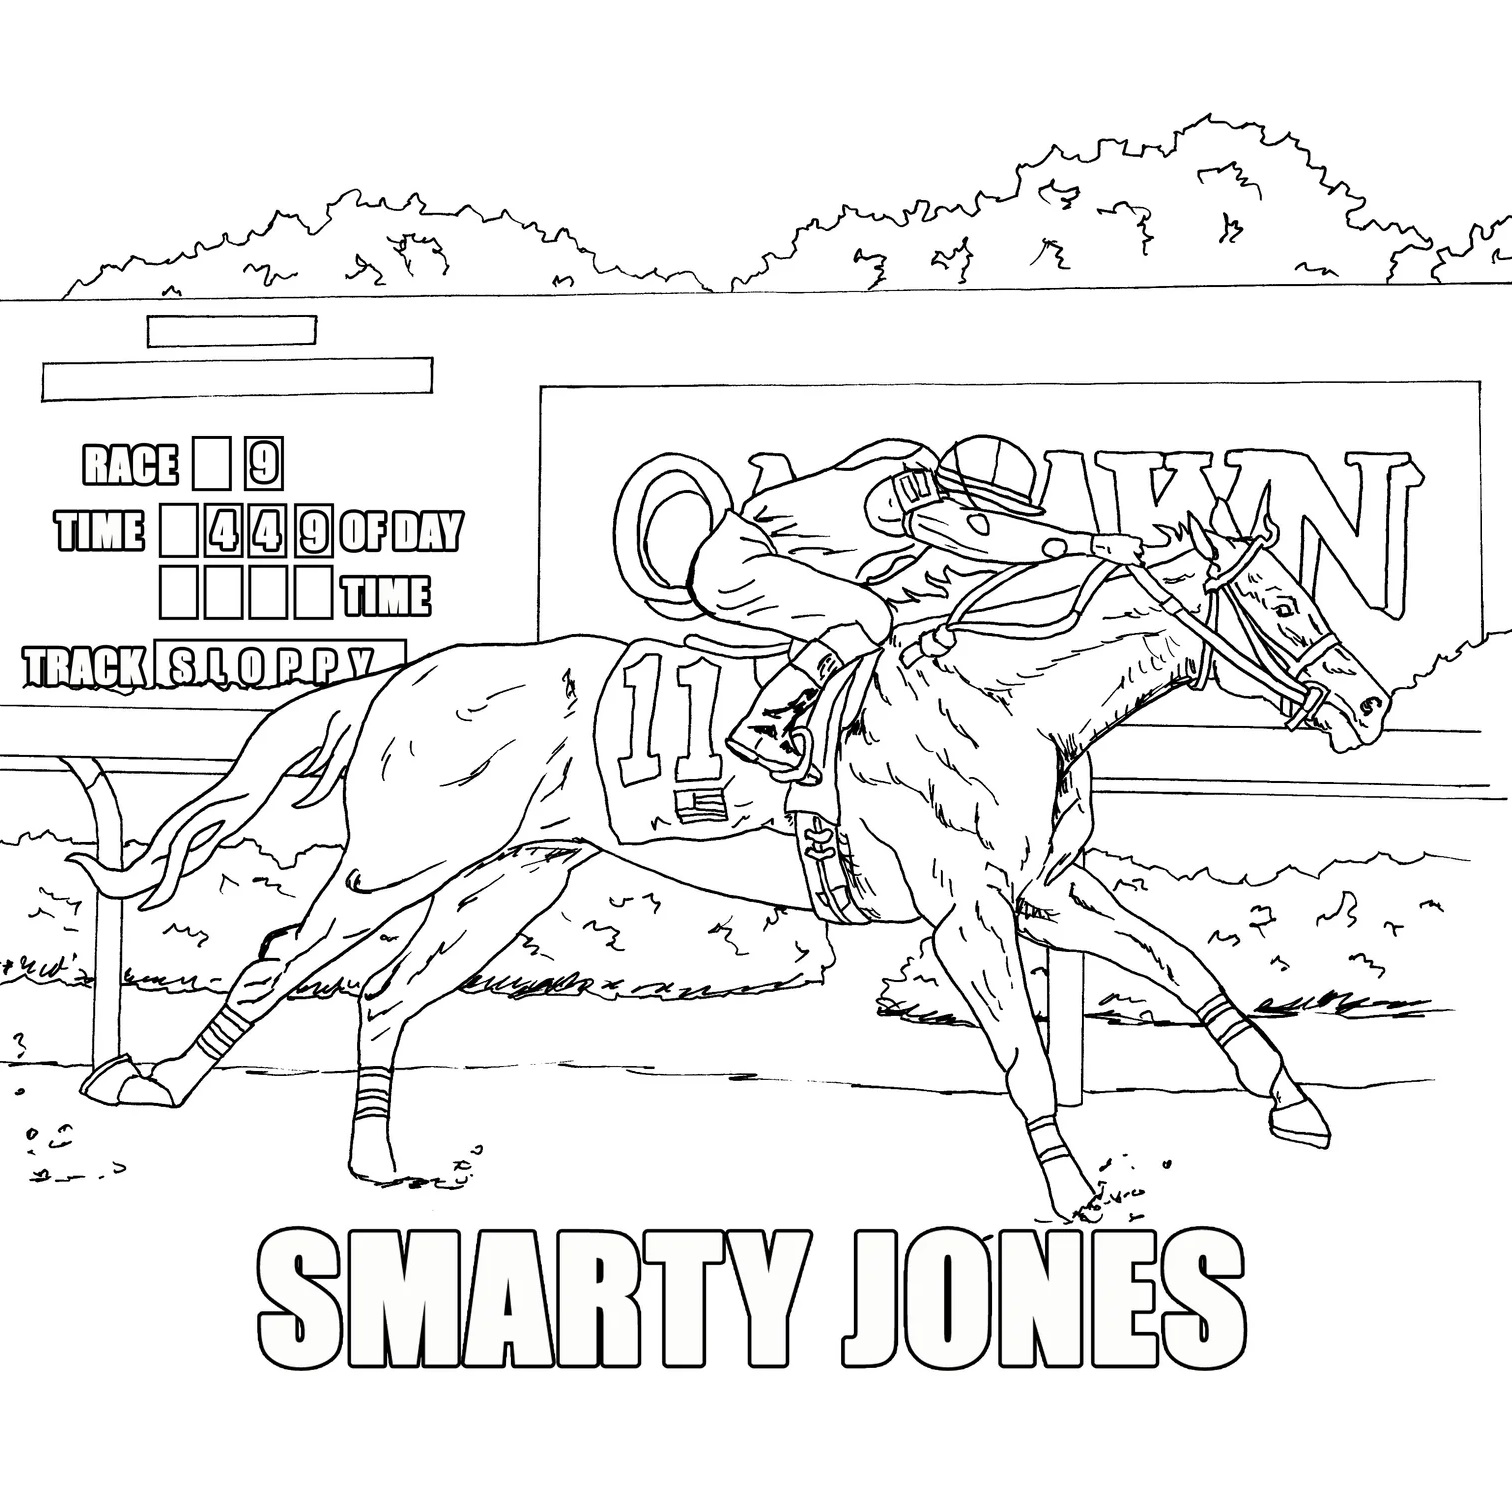 Amazing race horse coloring page